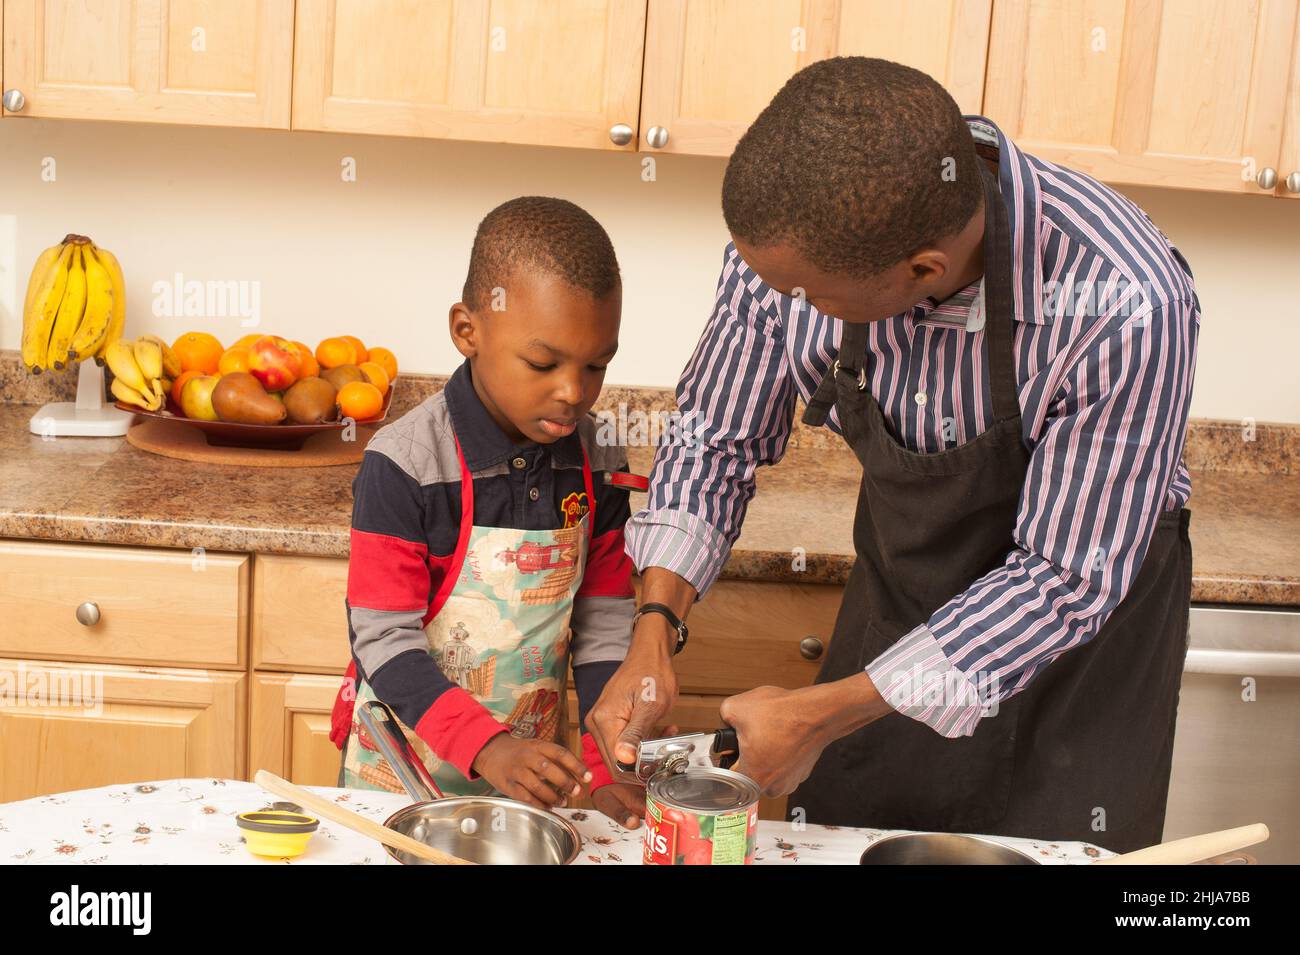 4 year old boy in kitchen with father learning how to use can opener to open can of tomatoes Stock Photo